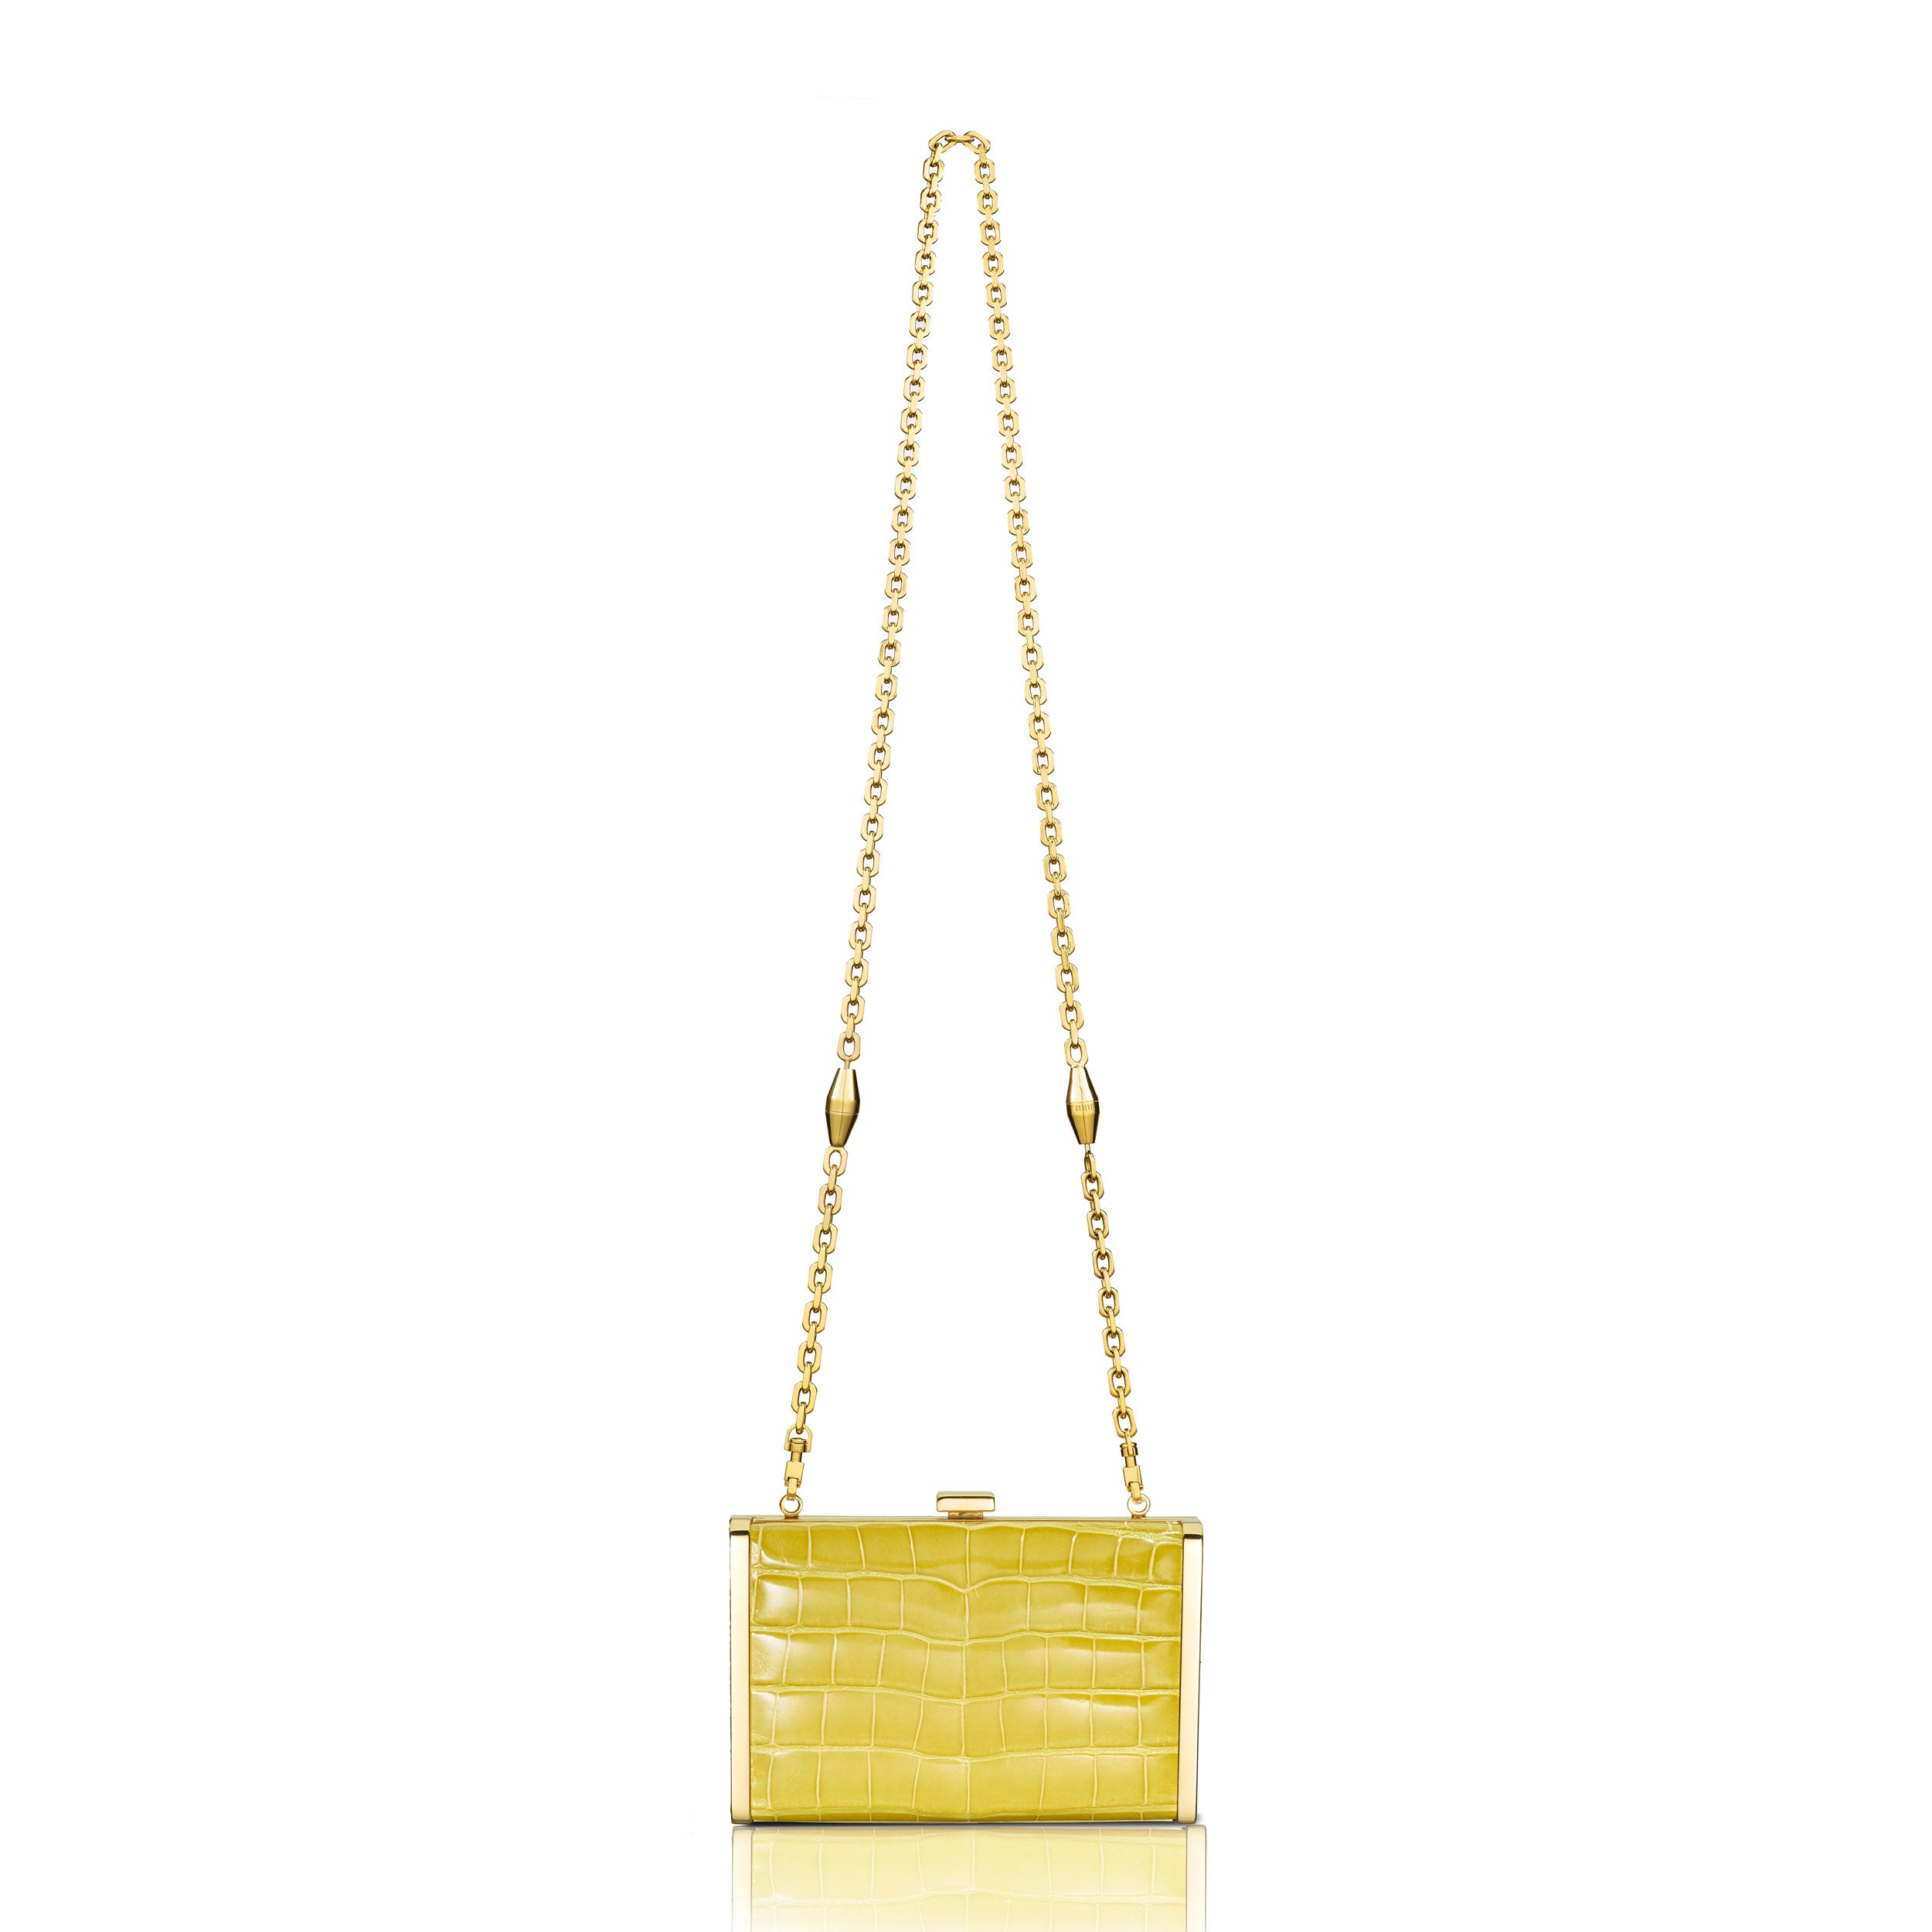 STALVEY Rounded Clutch in Yellow Alligator with 24kt Gold Hardware Front View with Chain